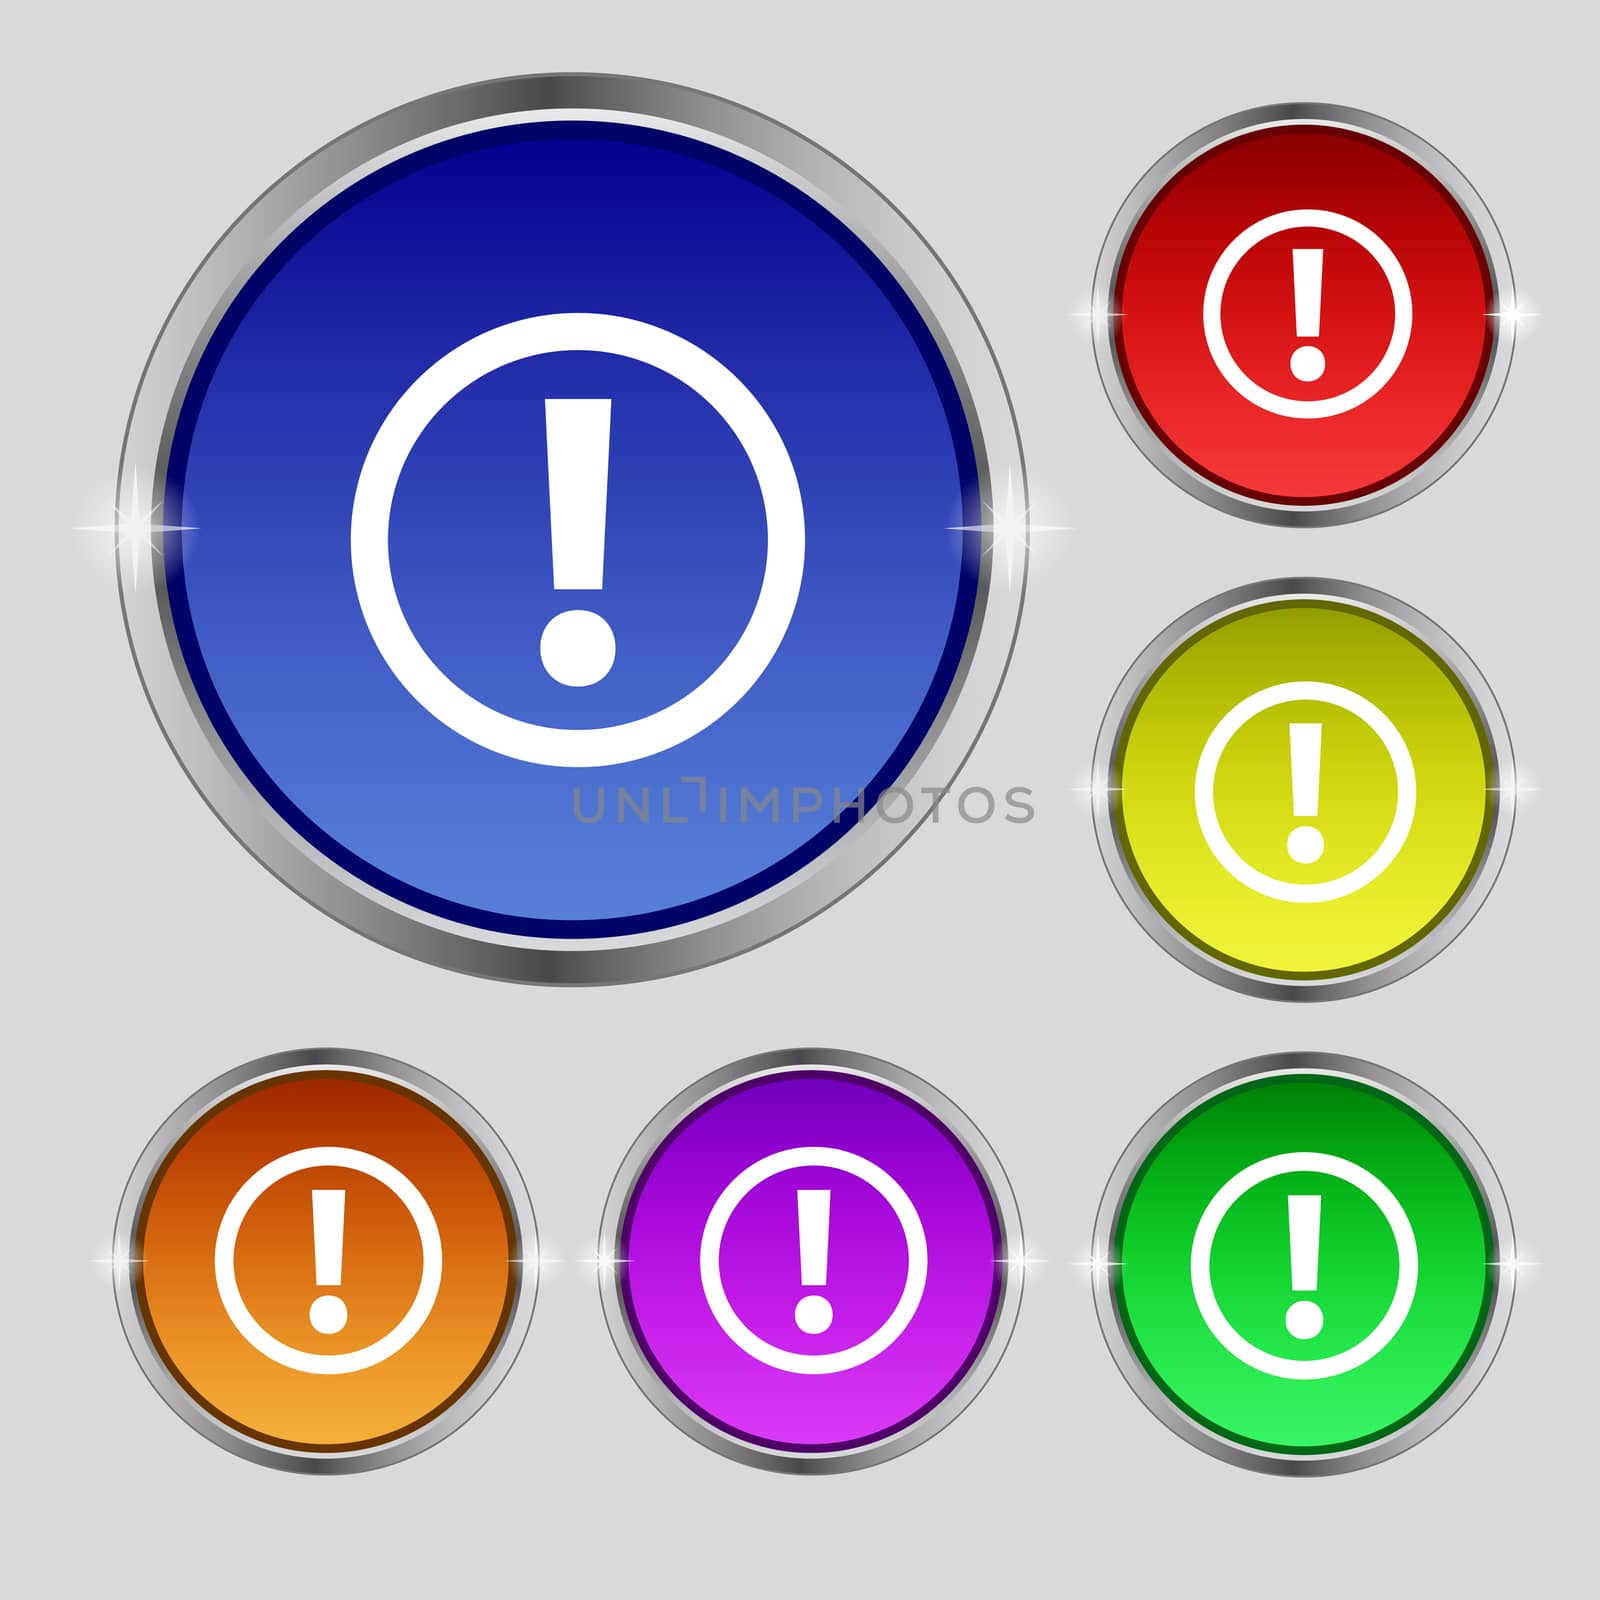 Attention sign icon. Exclamation mark. Hazard warning symbol. Set colour buttons illustration